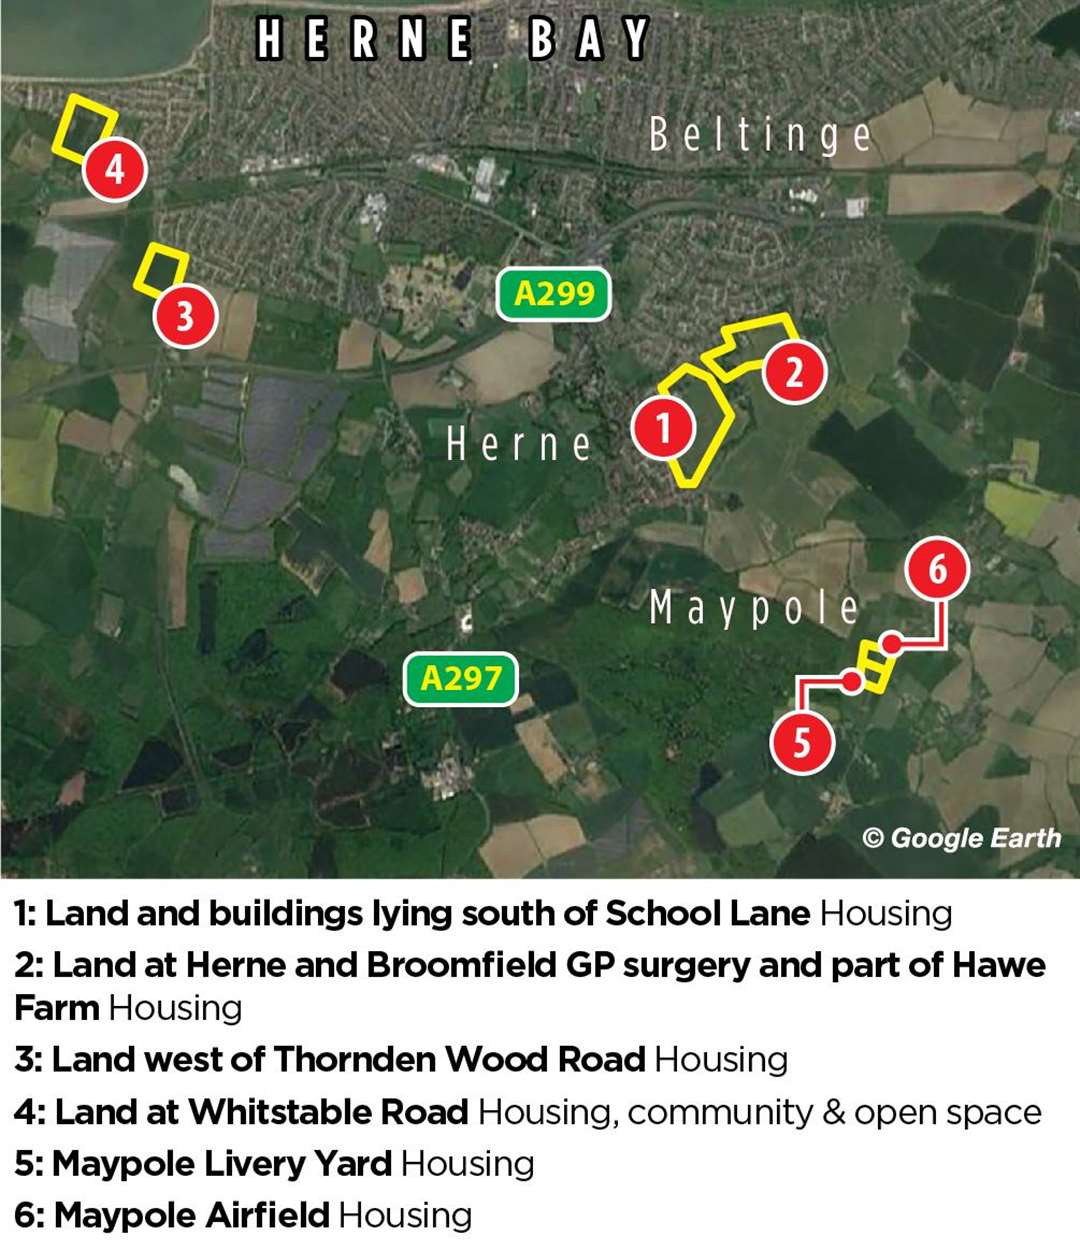 The largest sites so far put forward for the next Local Plan in Herne Bay